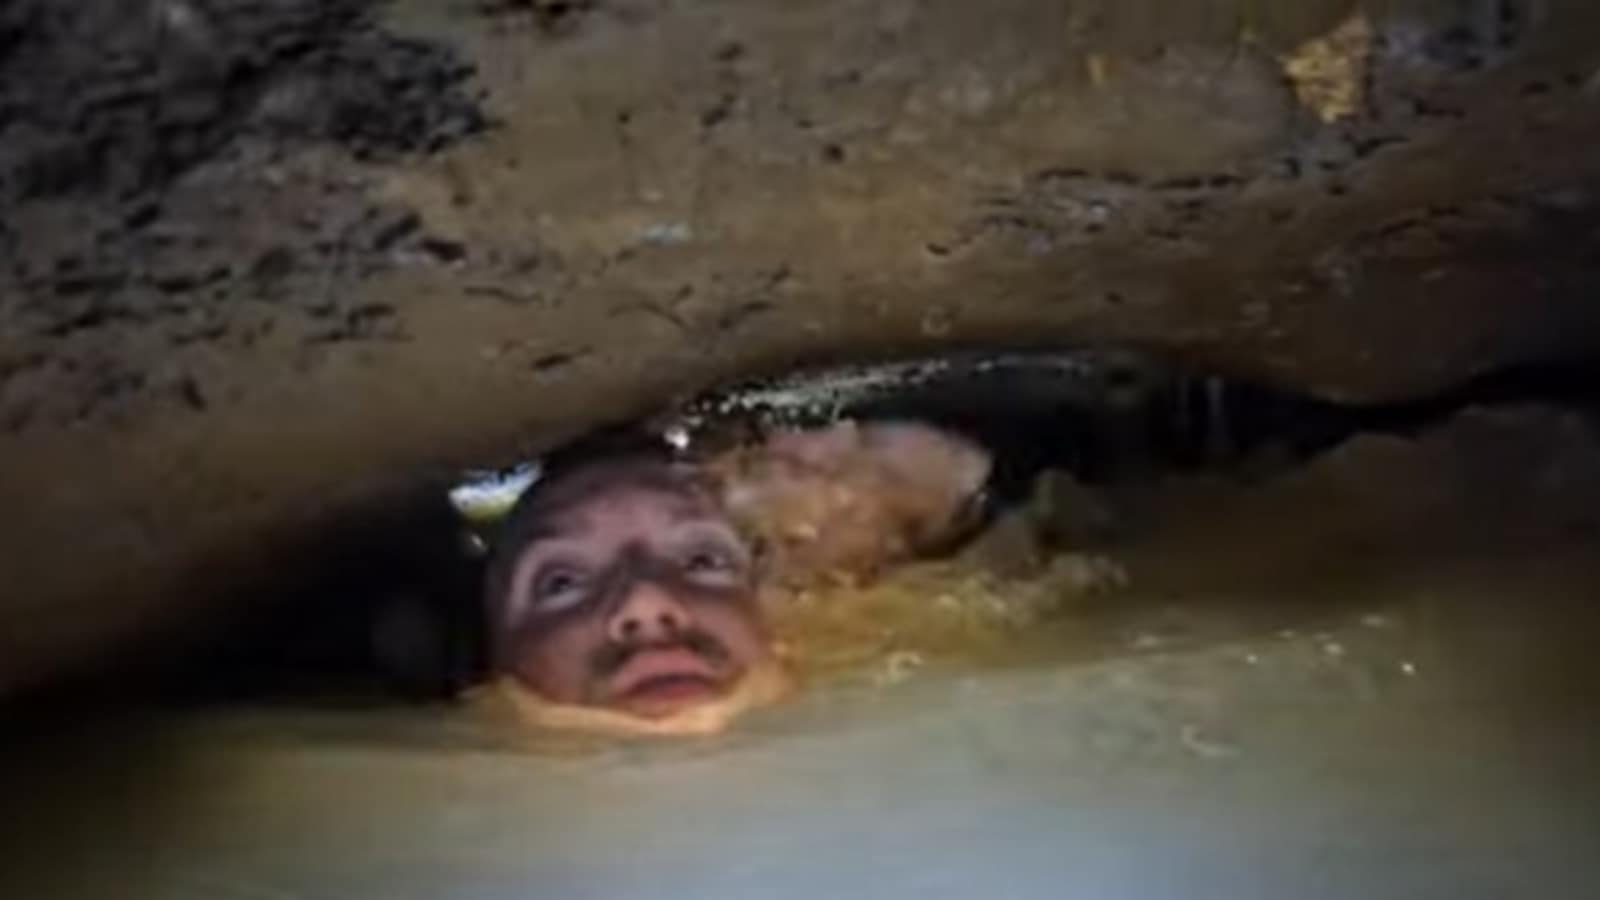 Man almost drowns while exploring cave. Scary moment captured on camera